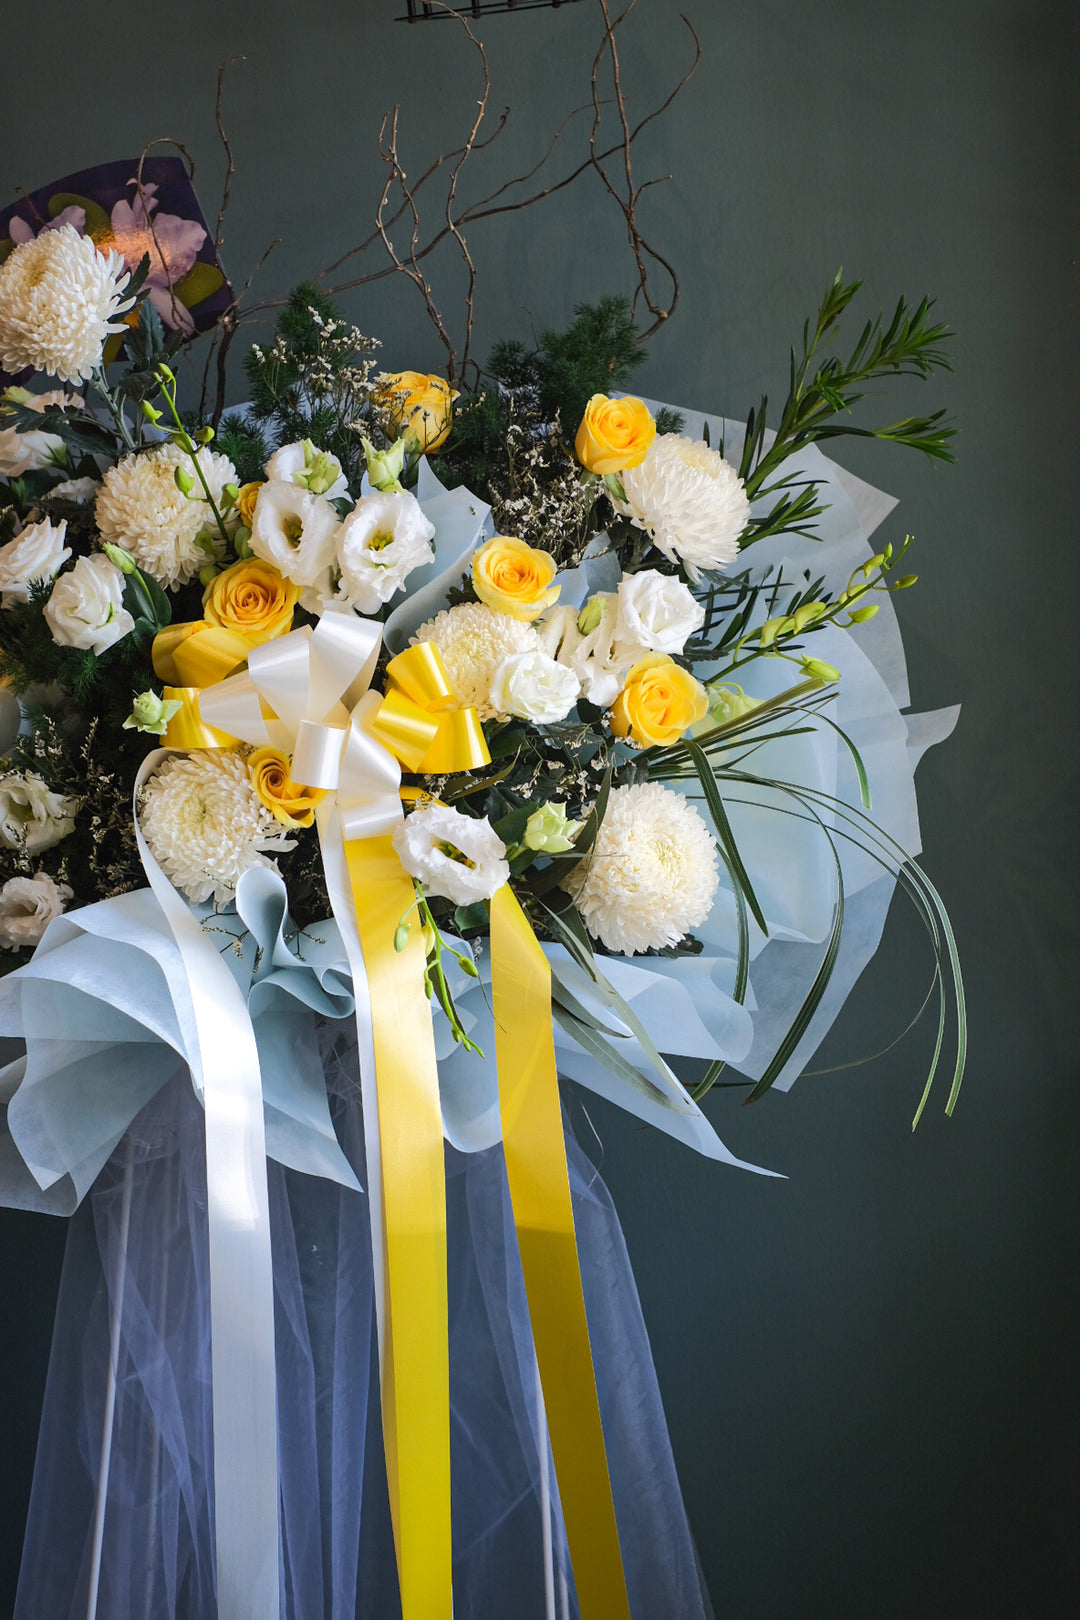 Delicate the full and abundant life of your loved one with this profusion of yellow and white combinations together with soothing blue. For same day condolences flowers delivery in Penang.